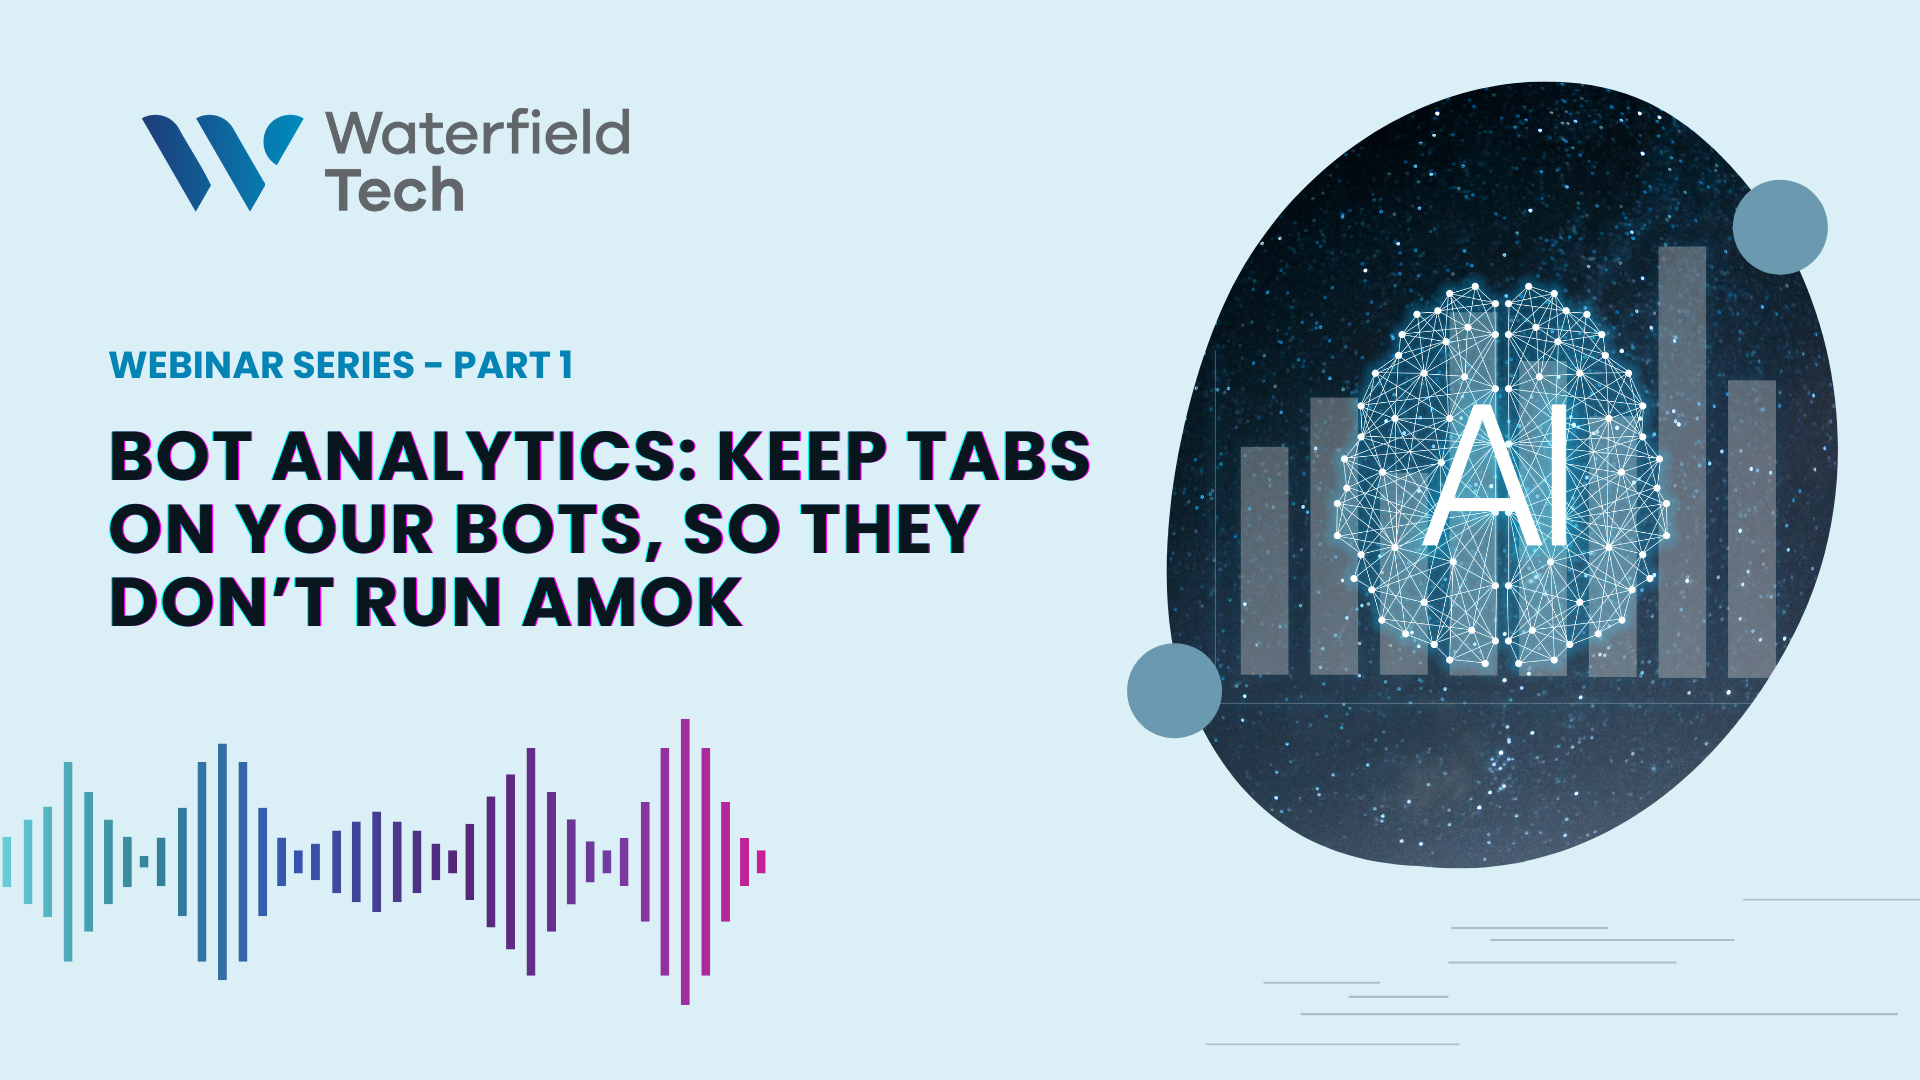 [Webinar Series] Part 1: Bot Analytics – Keep Tabs on Your Bots, So They Don’t Run Amok